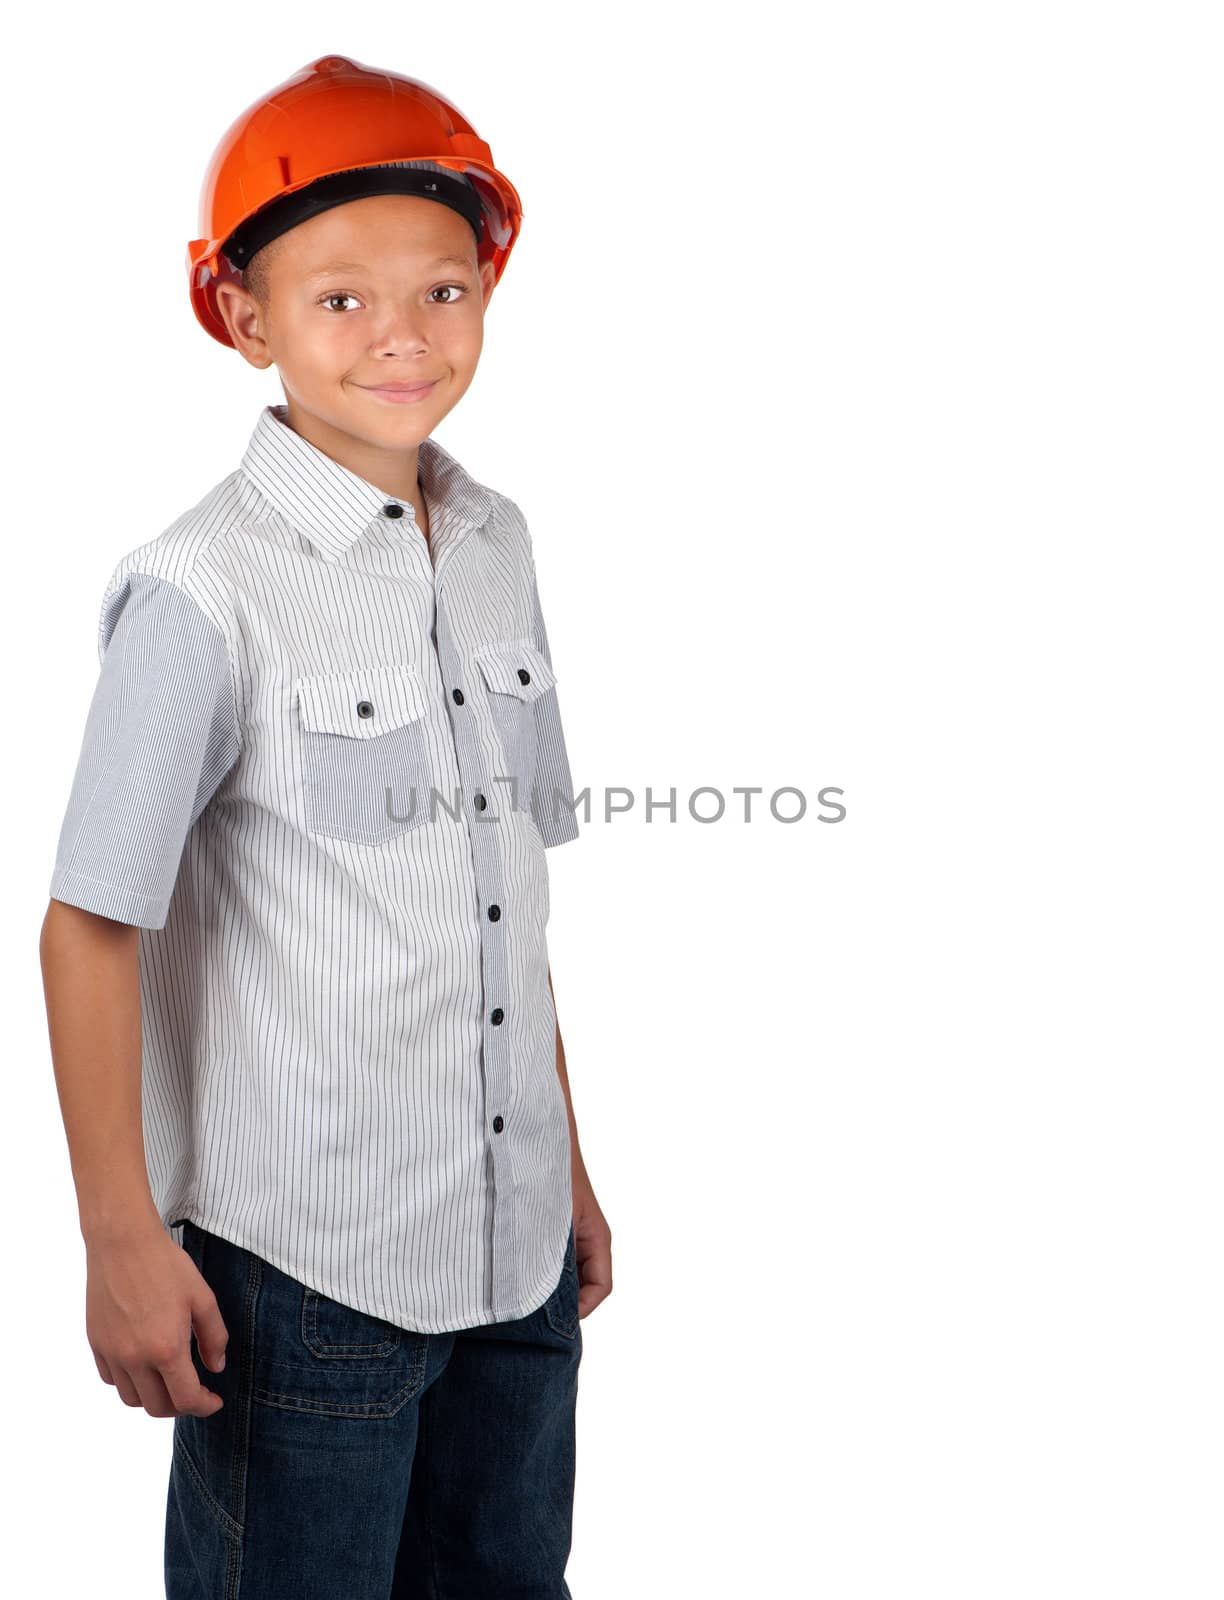 A young boy dons an orange hard hat, and he smiles.